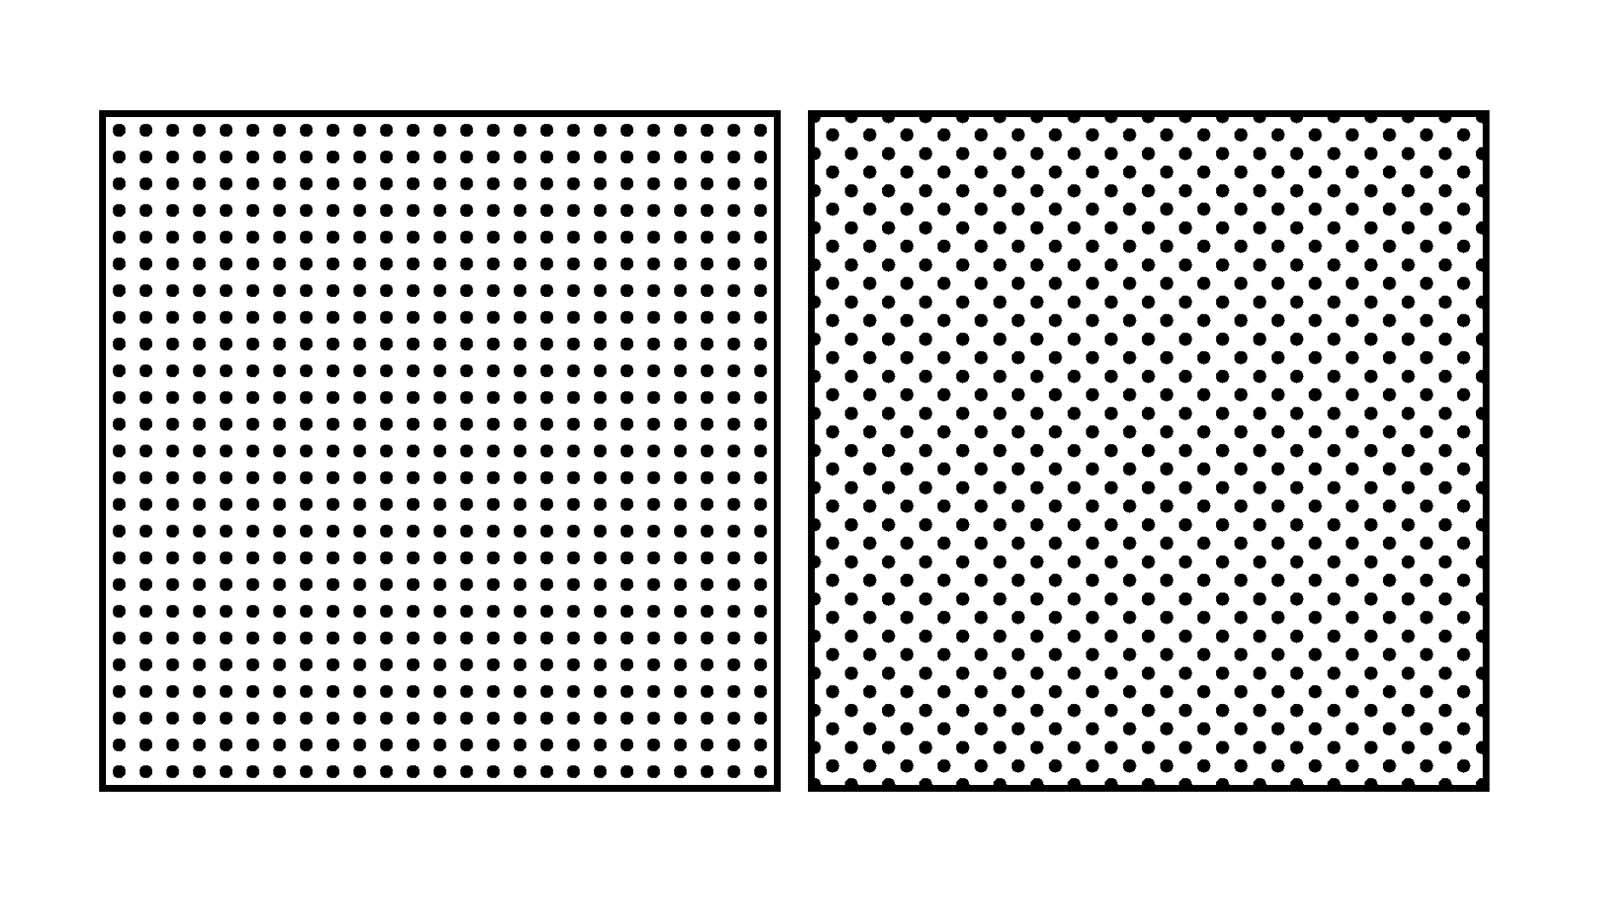 Dotted backgrounds (black dots on white) using regular grid (left) and angled grid (right)